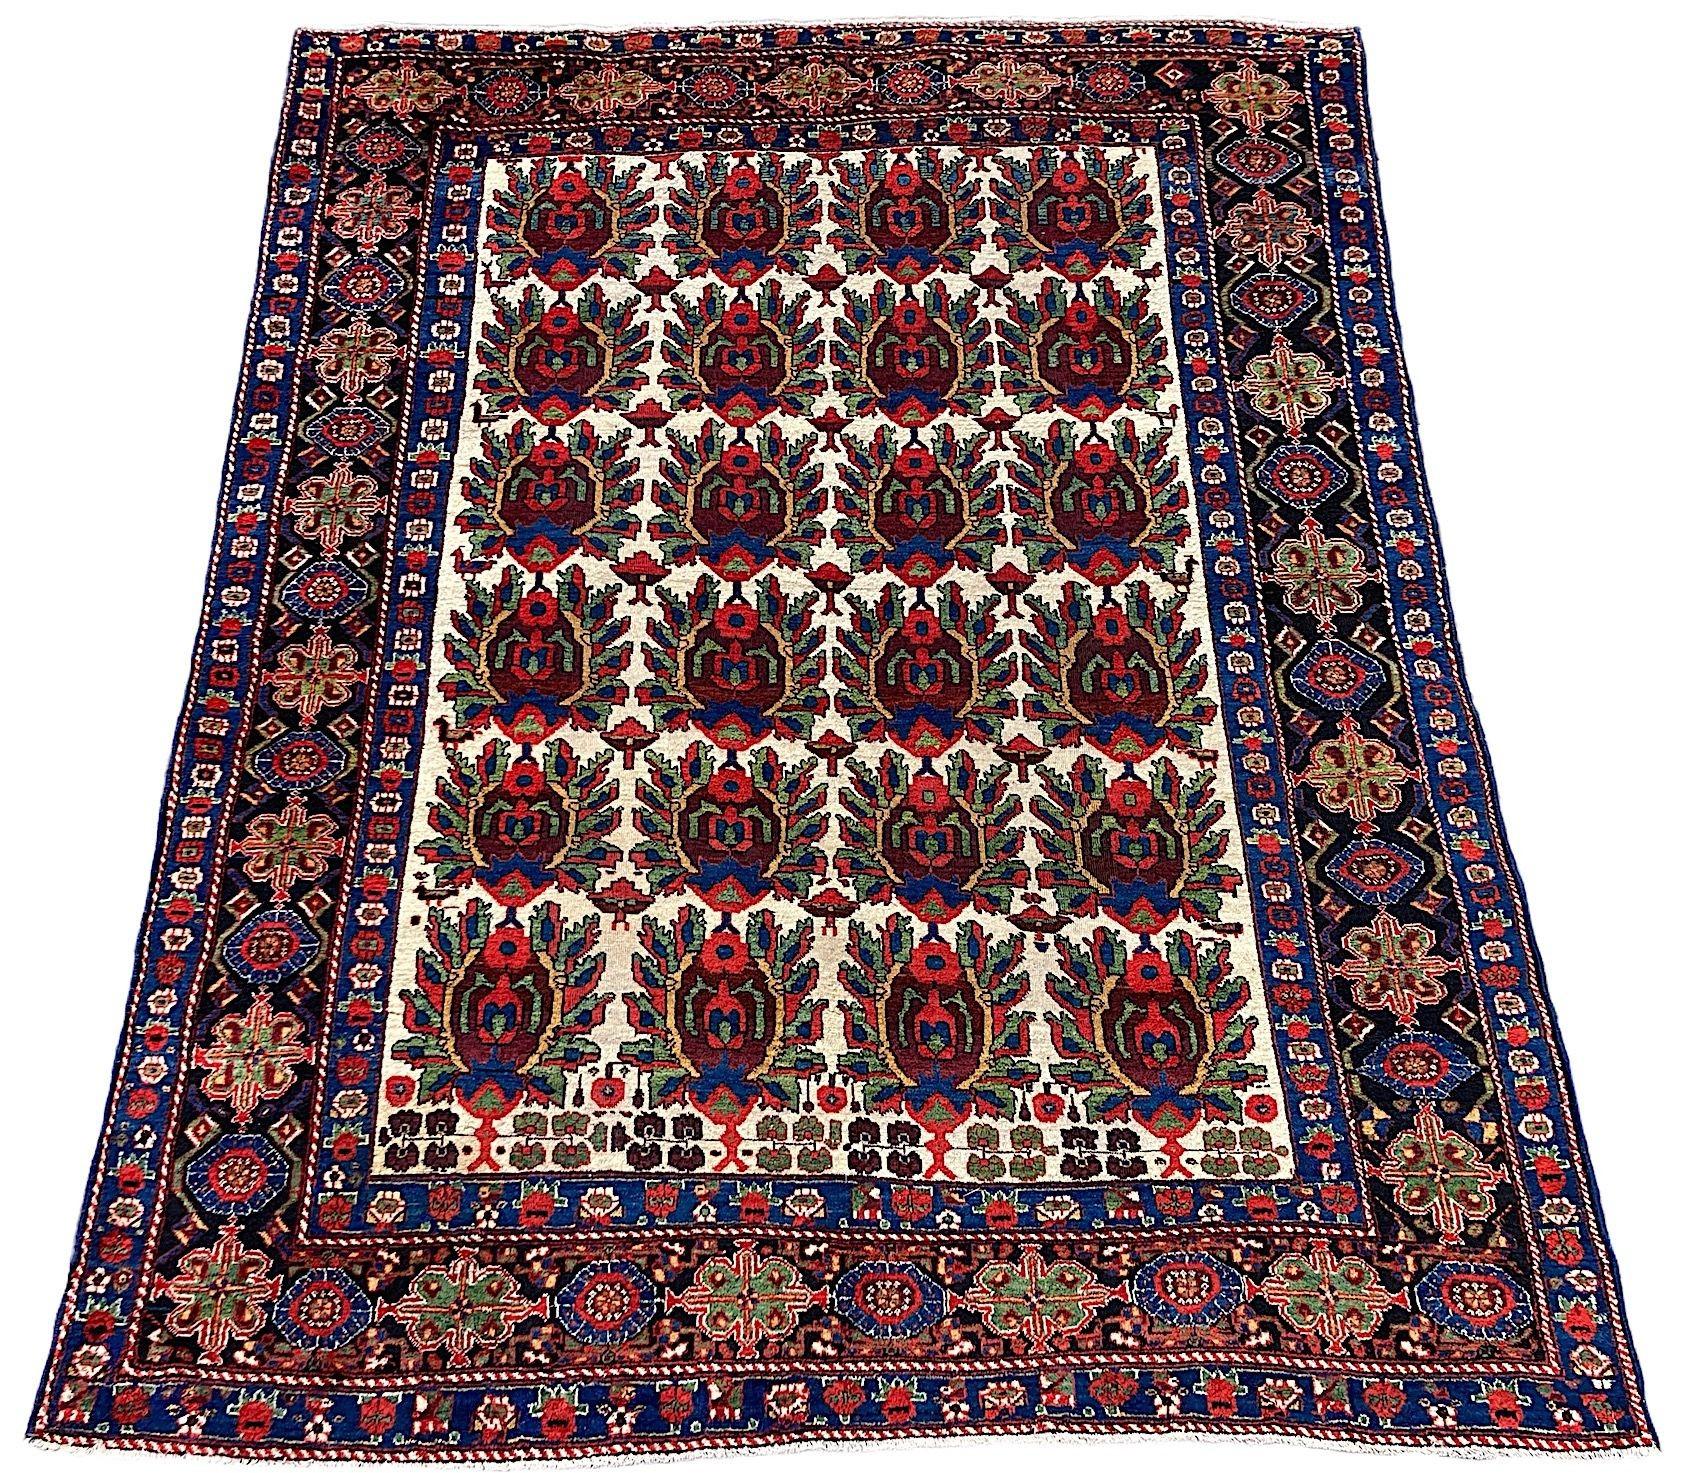 A fabulous antique Afshar rug, handwoven circa 1900. The rug features an all over repeating shield design on an unusual ivory field surrounded by a deep indigo border. Finely woven with soft, velvety wool and outstanding secondary colours,